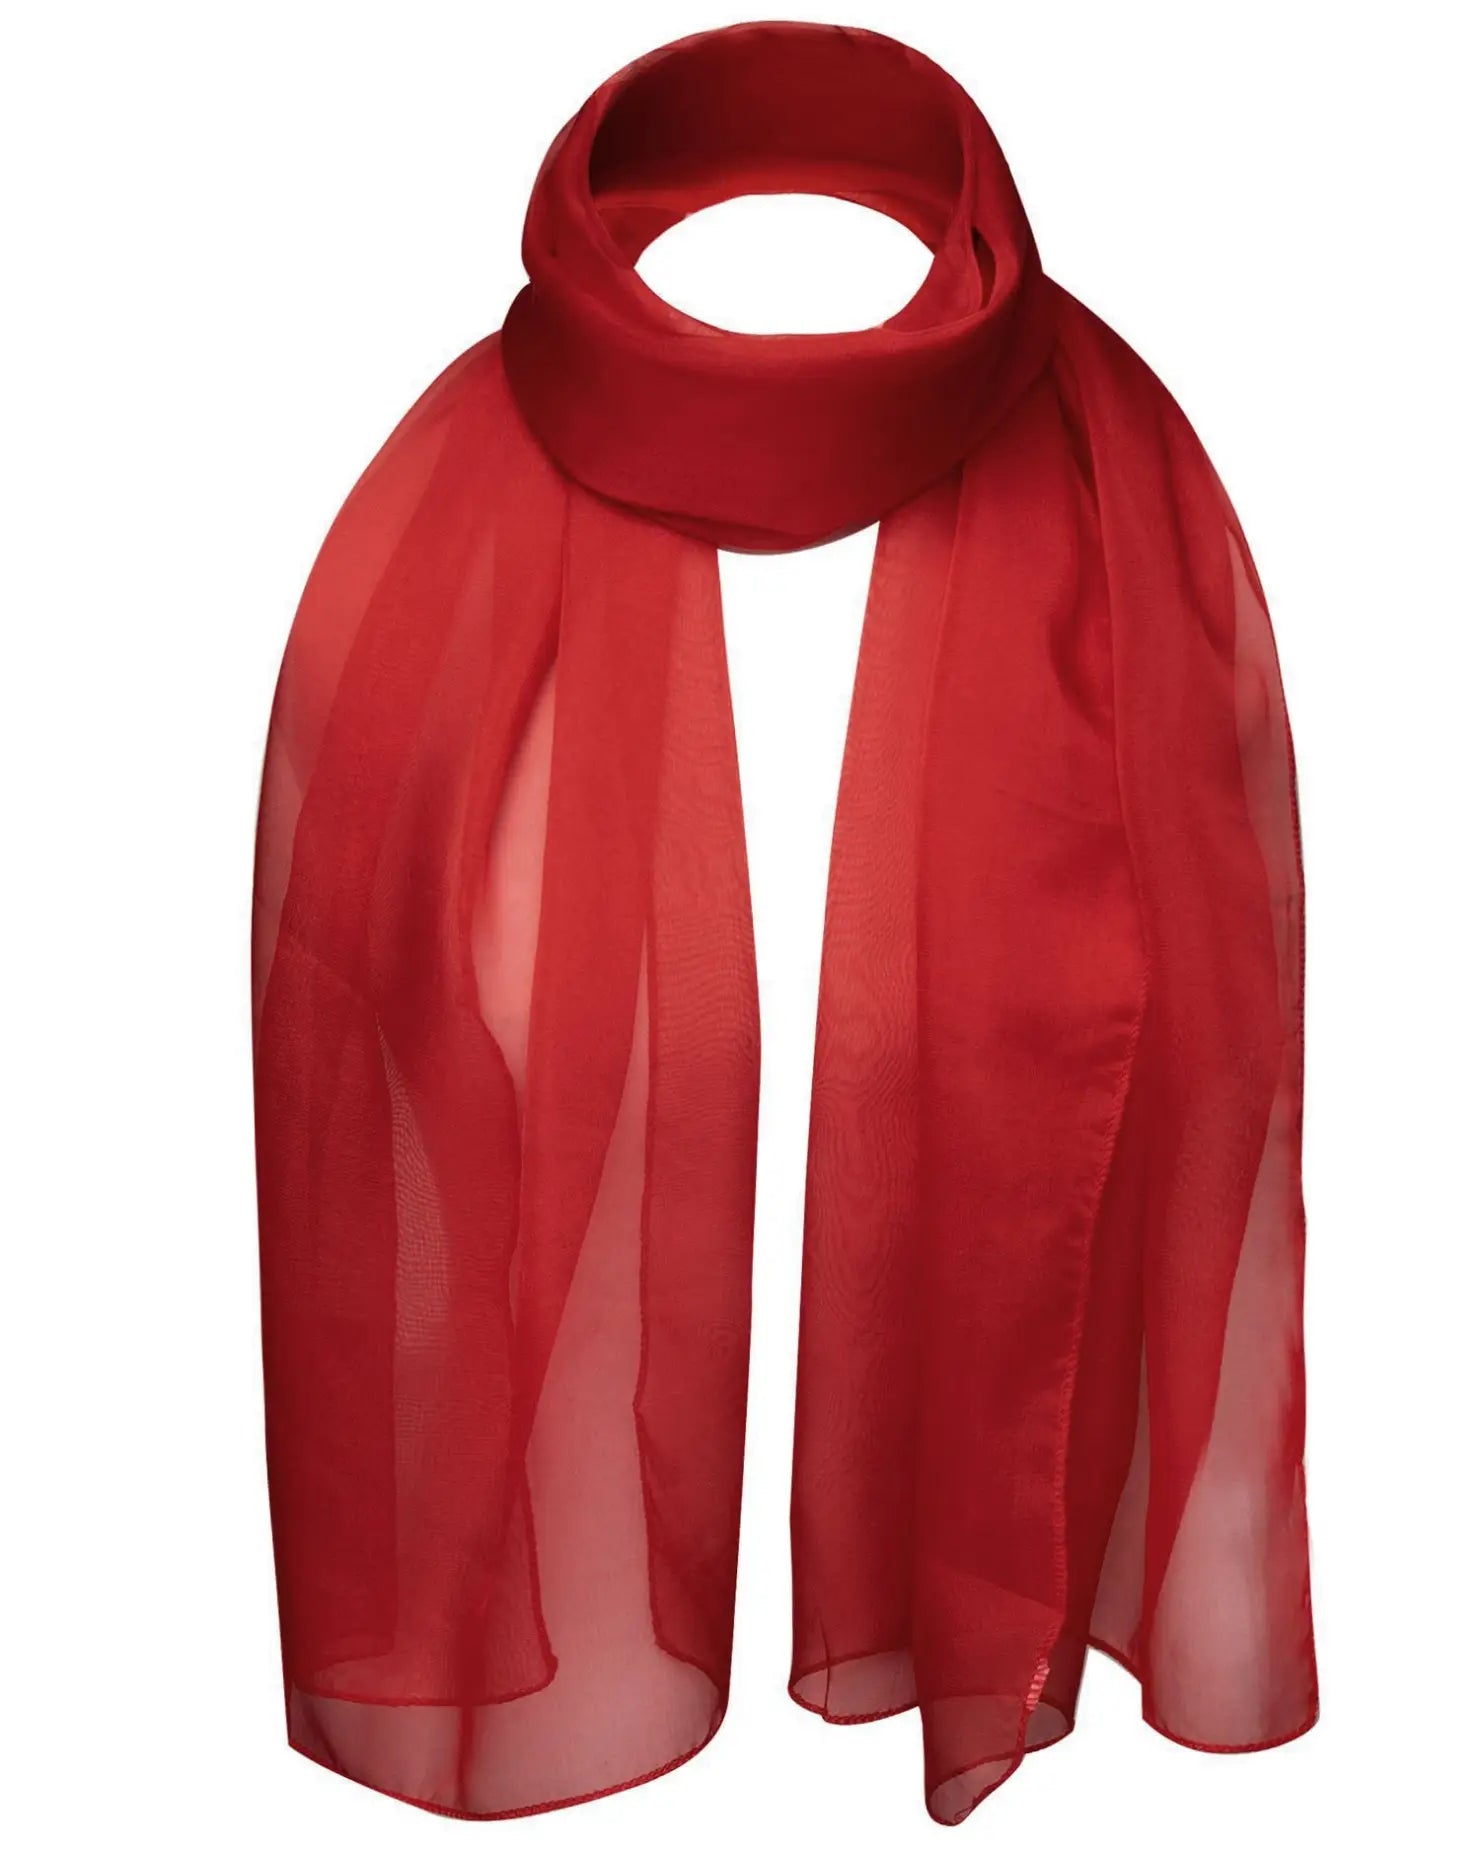 Luxurious Lightweight Chiffon Scarf: Classic Plain Design - Red scarf with sheer edge